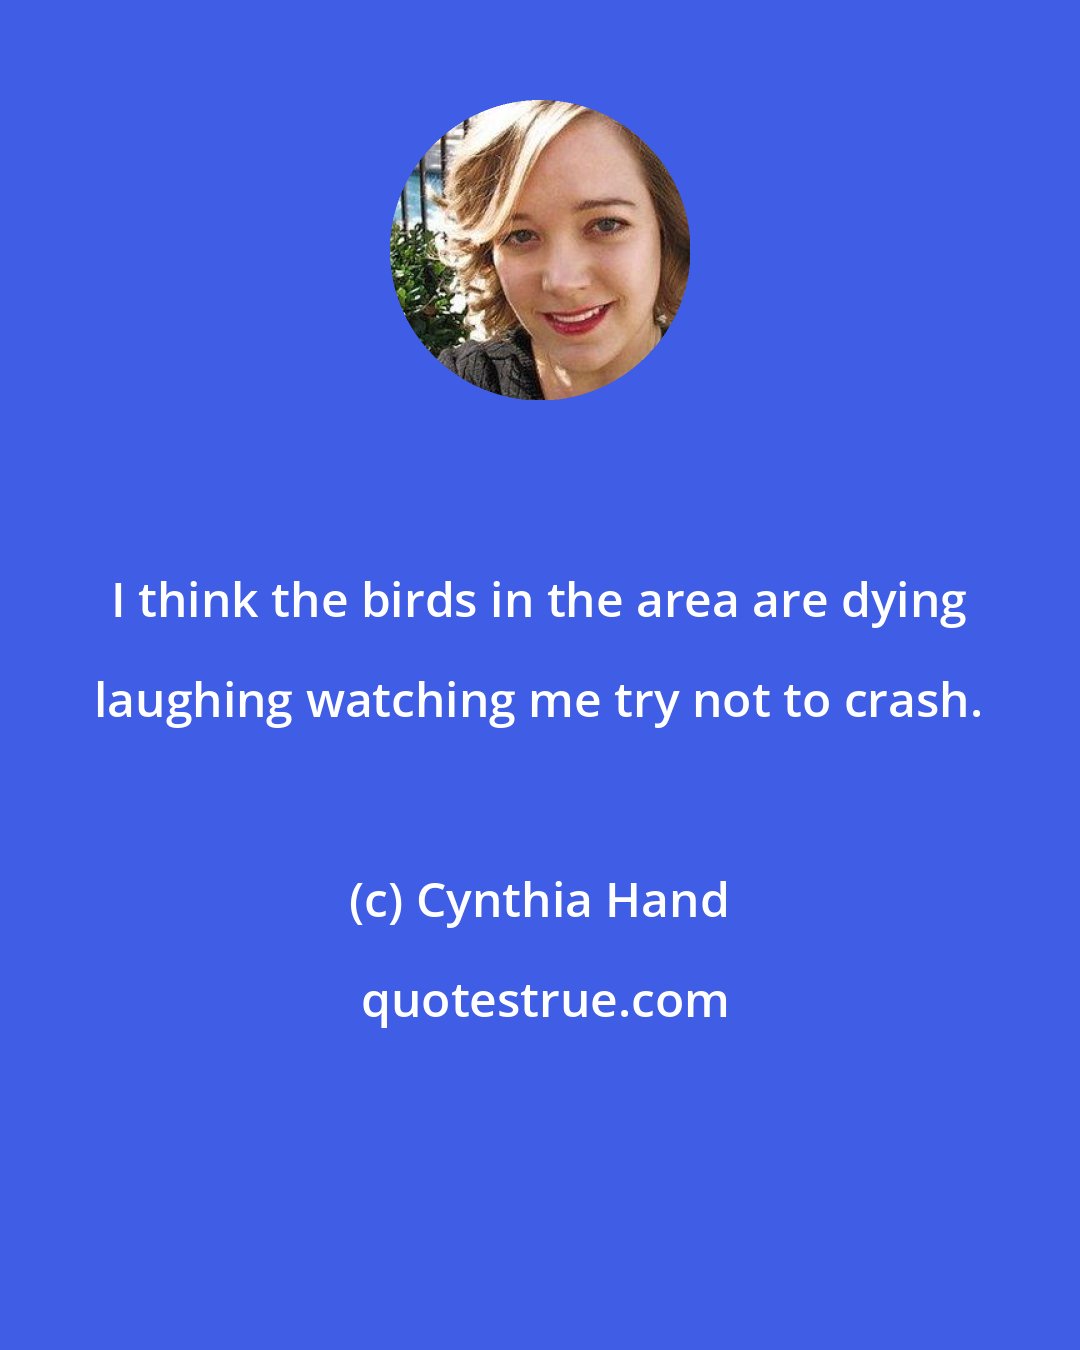 Cynthia Hand: I think the birds in the area are dying laughing watching me try not to crash.